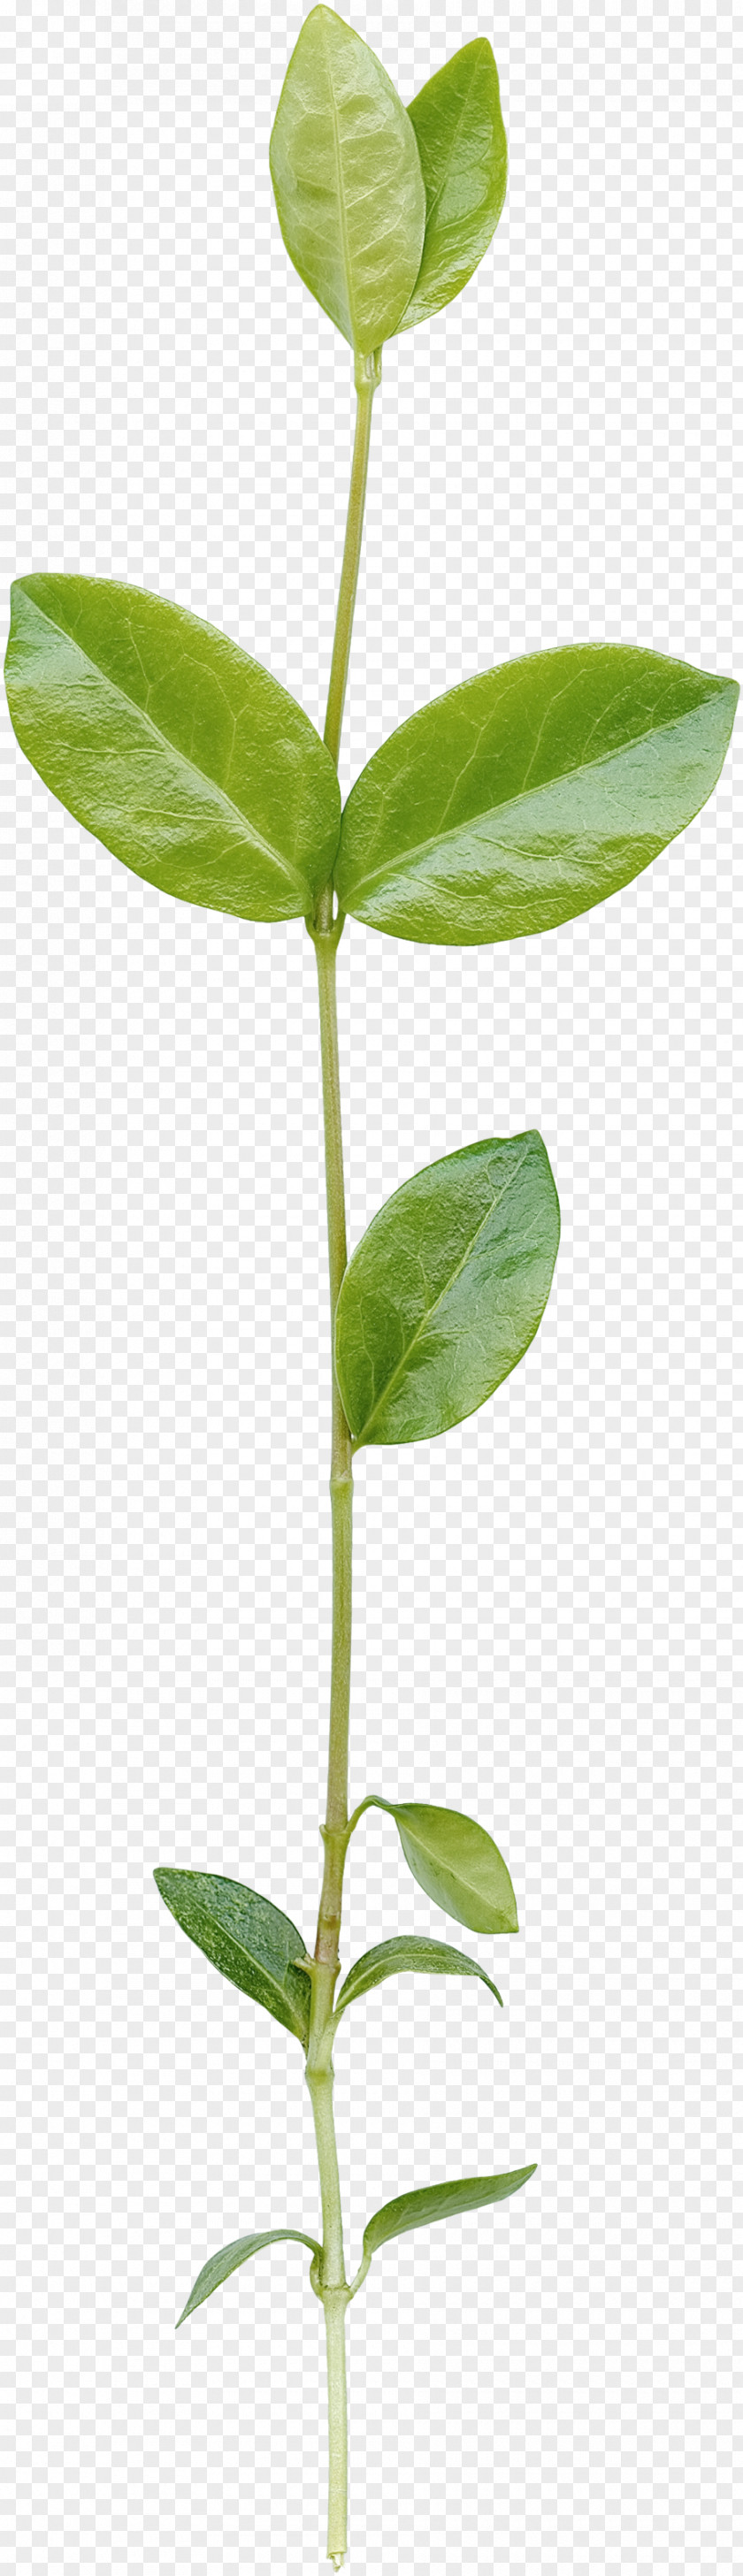 Green Leaves Download PNG